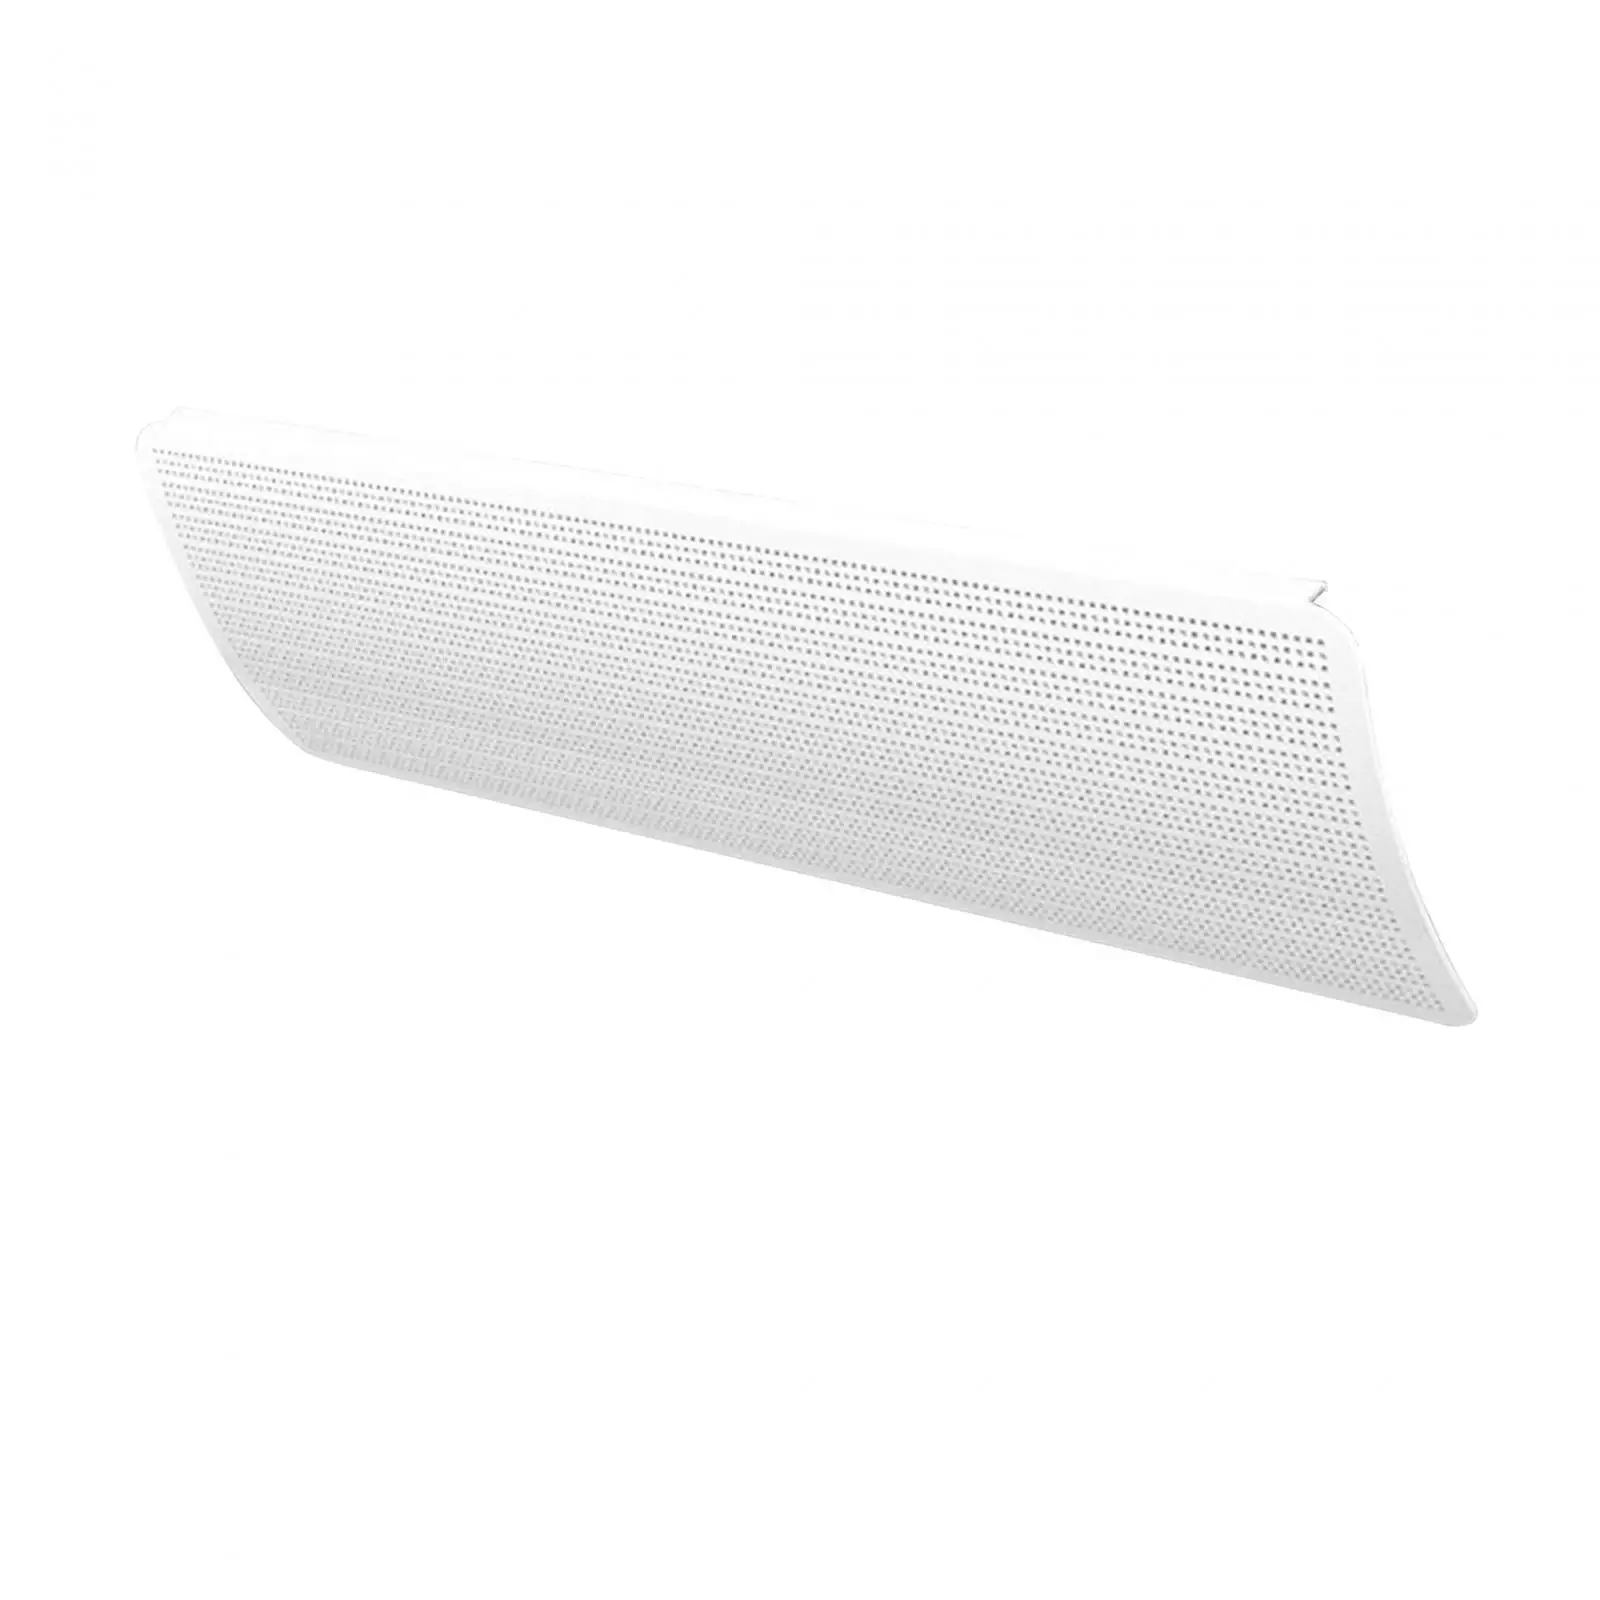 Central Air Conditioner Air Deflector Vent Deflector Side Accessory Adjusted up and Down Dense Hole Designed Wind Guide Cover